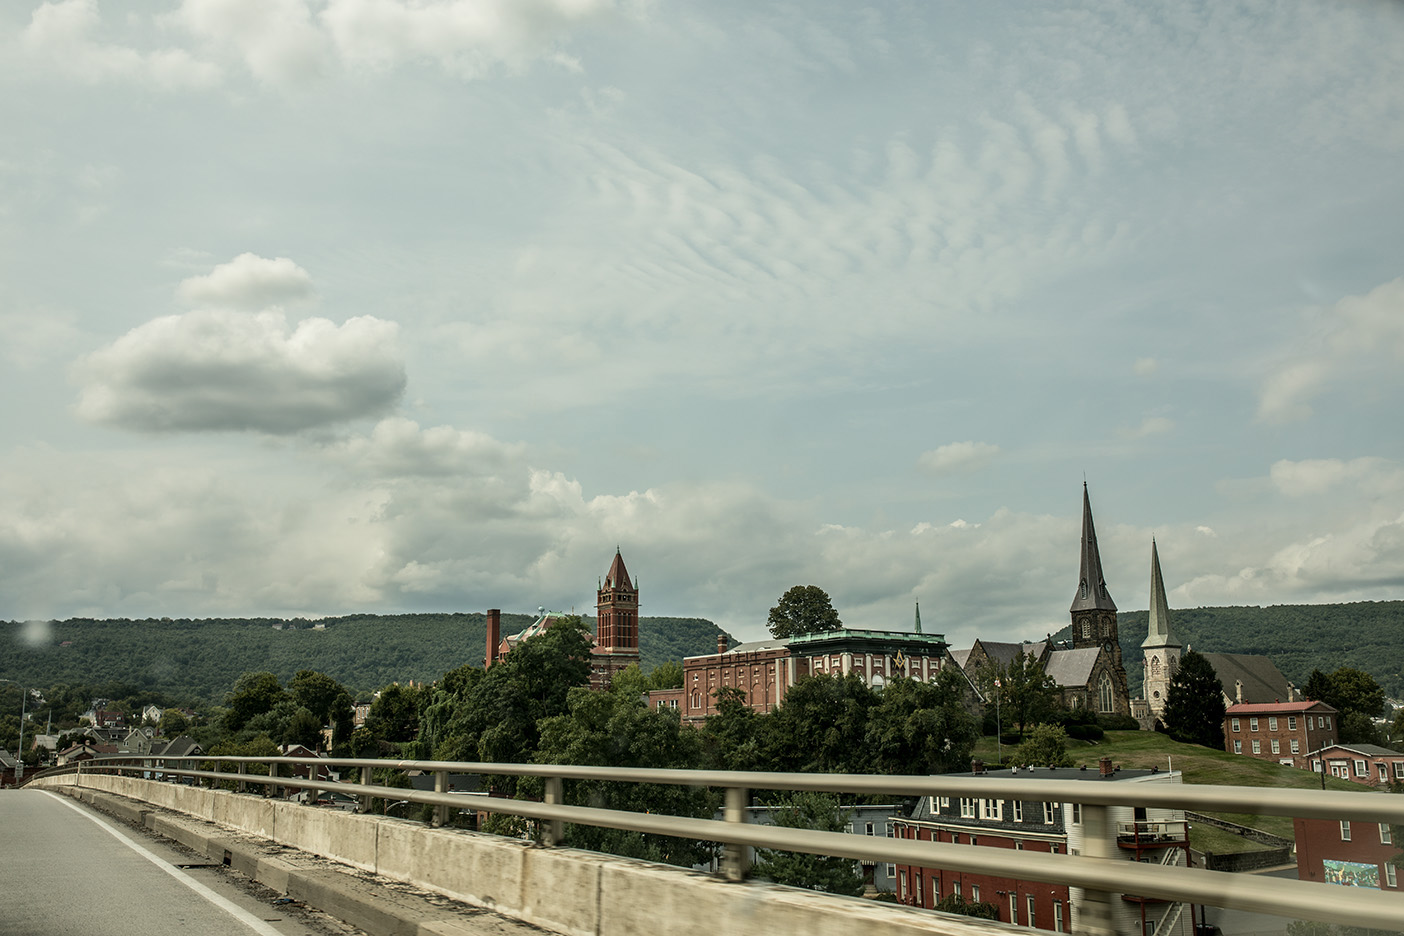 Spires from churches in Cumberland, Maryland.